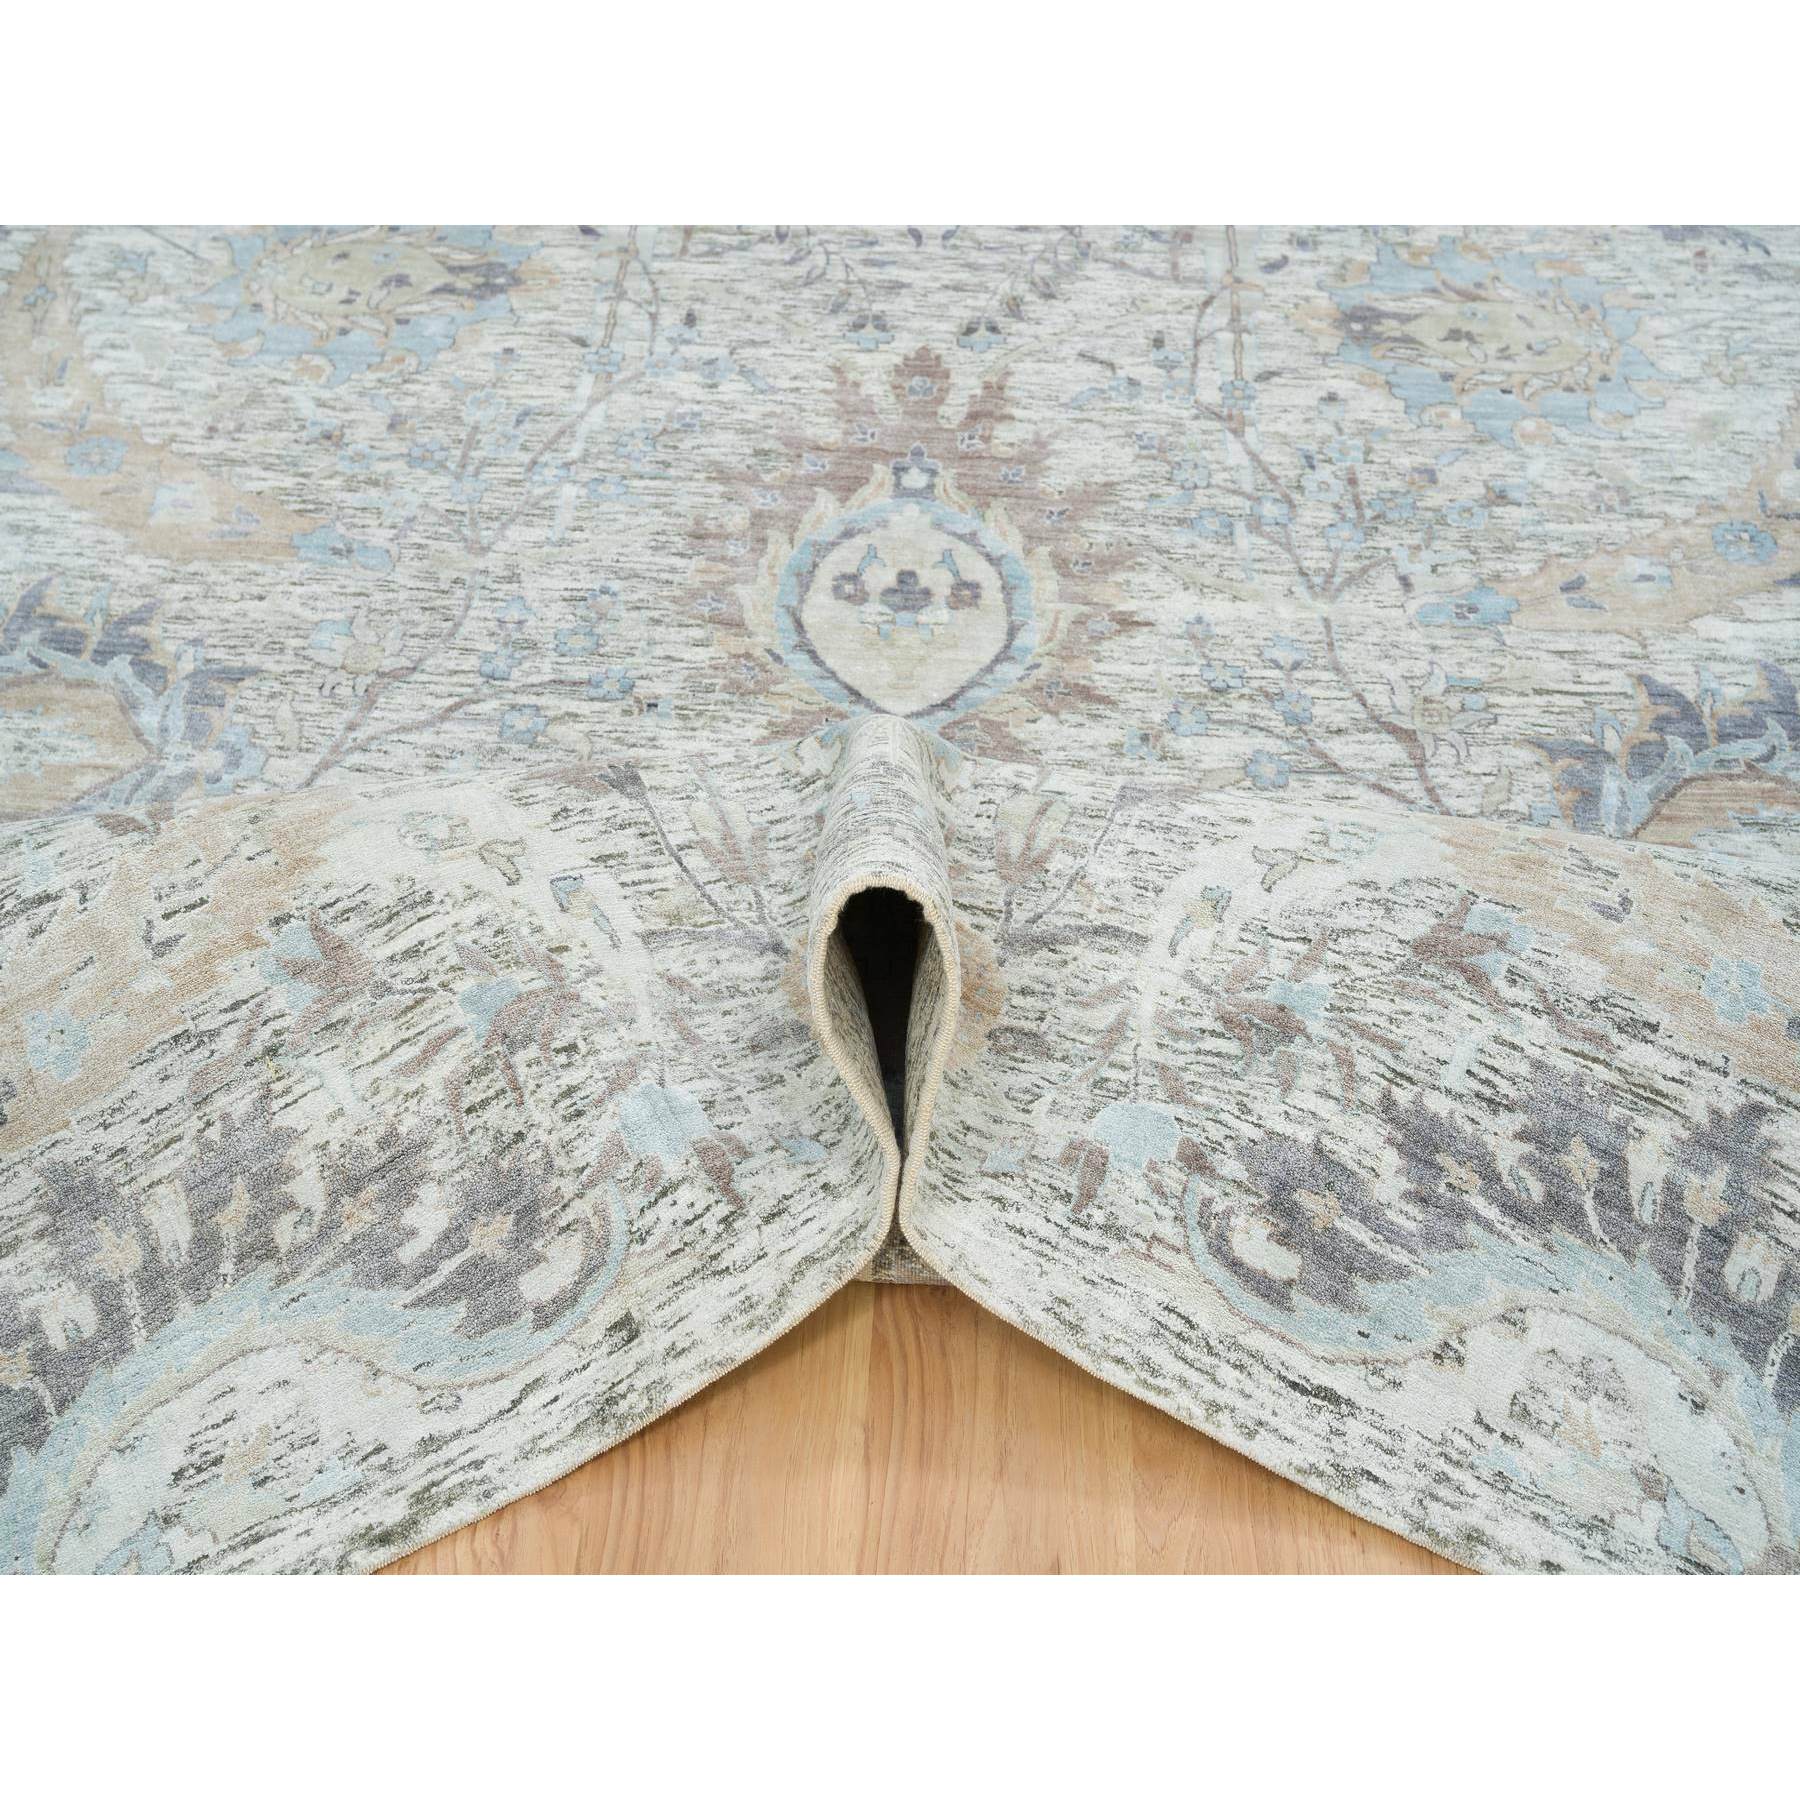  Silk Hand-Knotted Area Rug 10'0